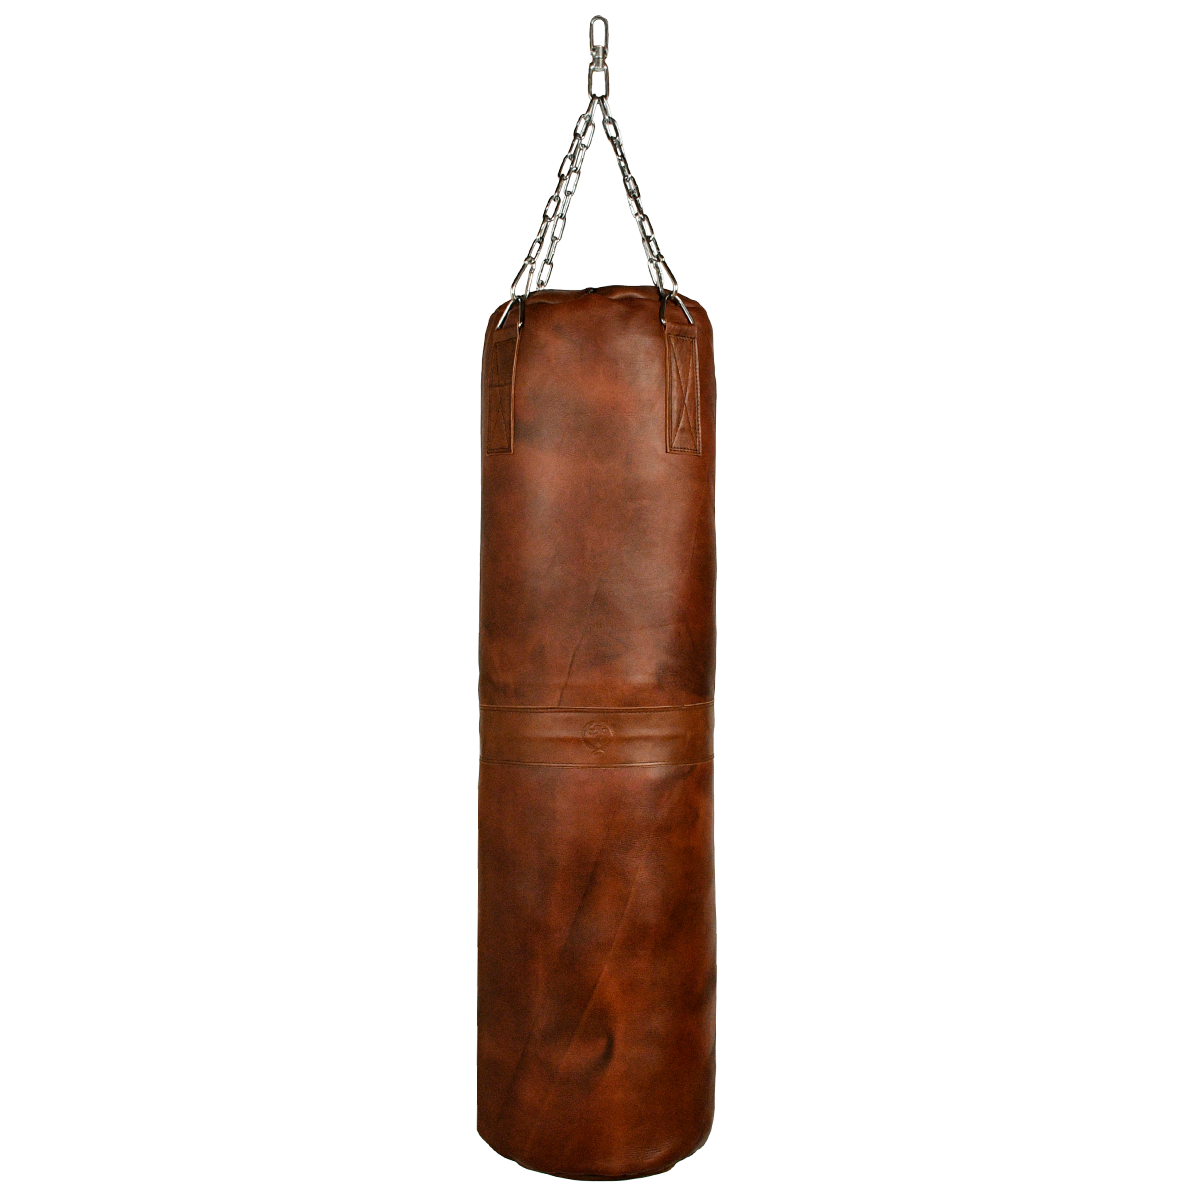 MODEST VINTAGE PLAYER - HEAVY PUNCHING BAG - BROWN